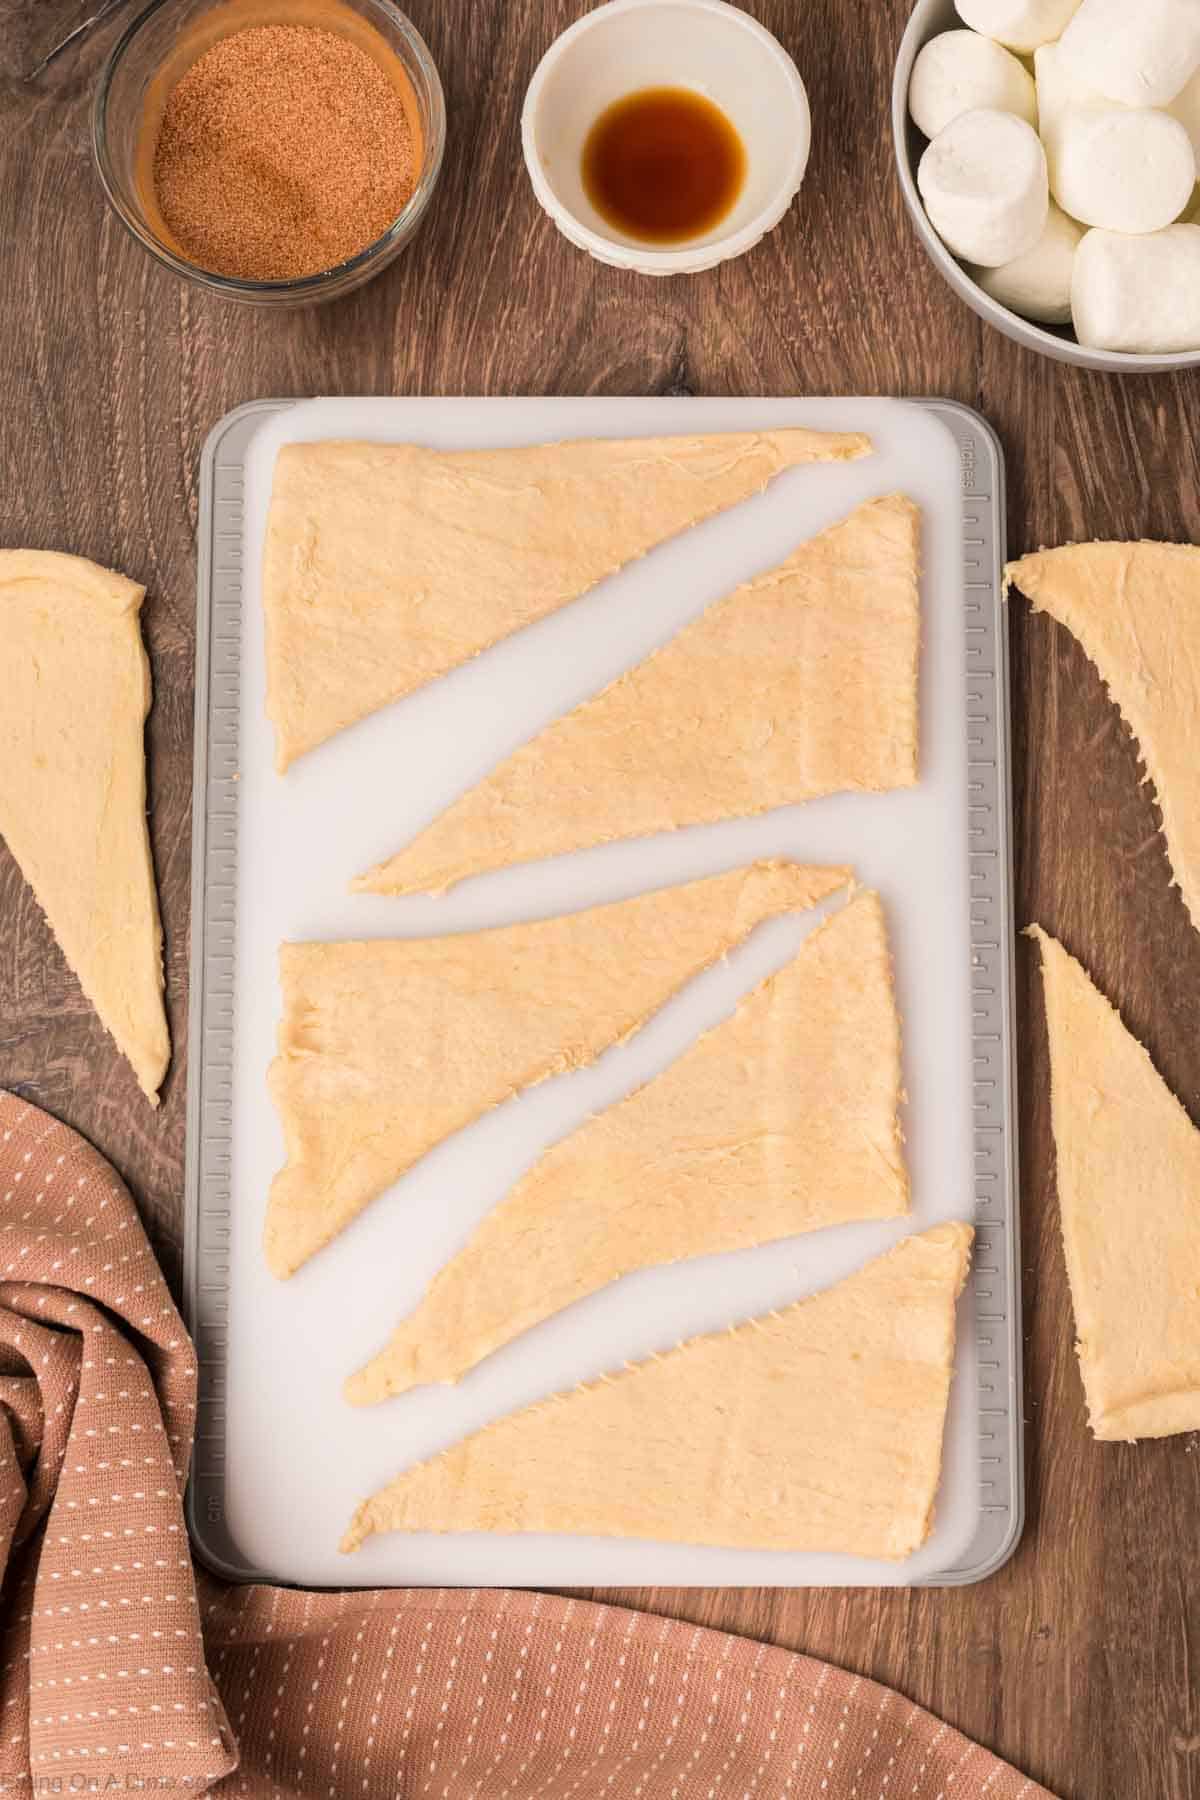 Place the crescent roll dough on a baking sheet